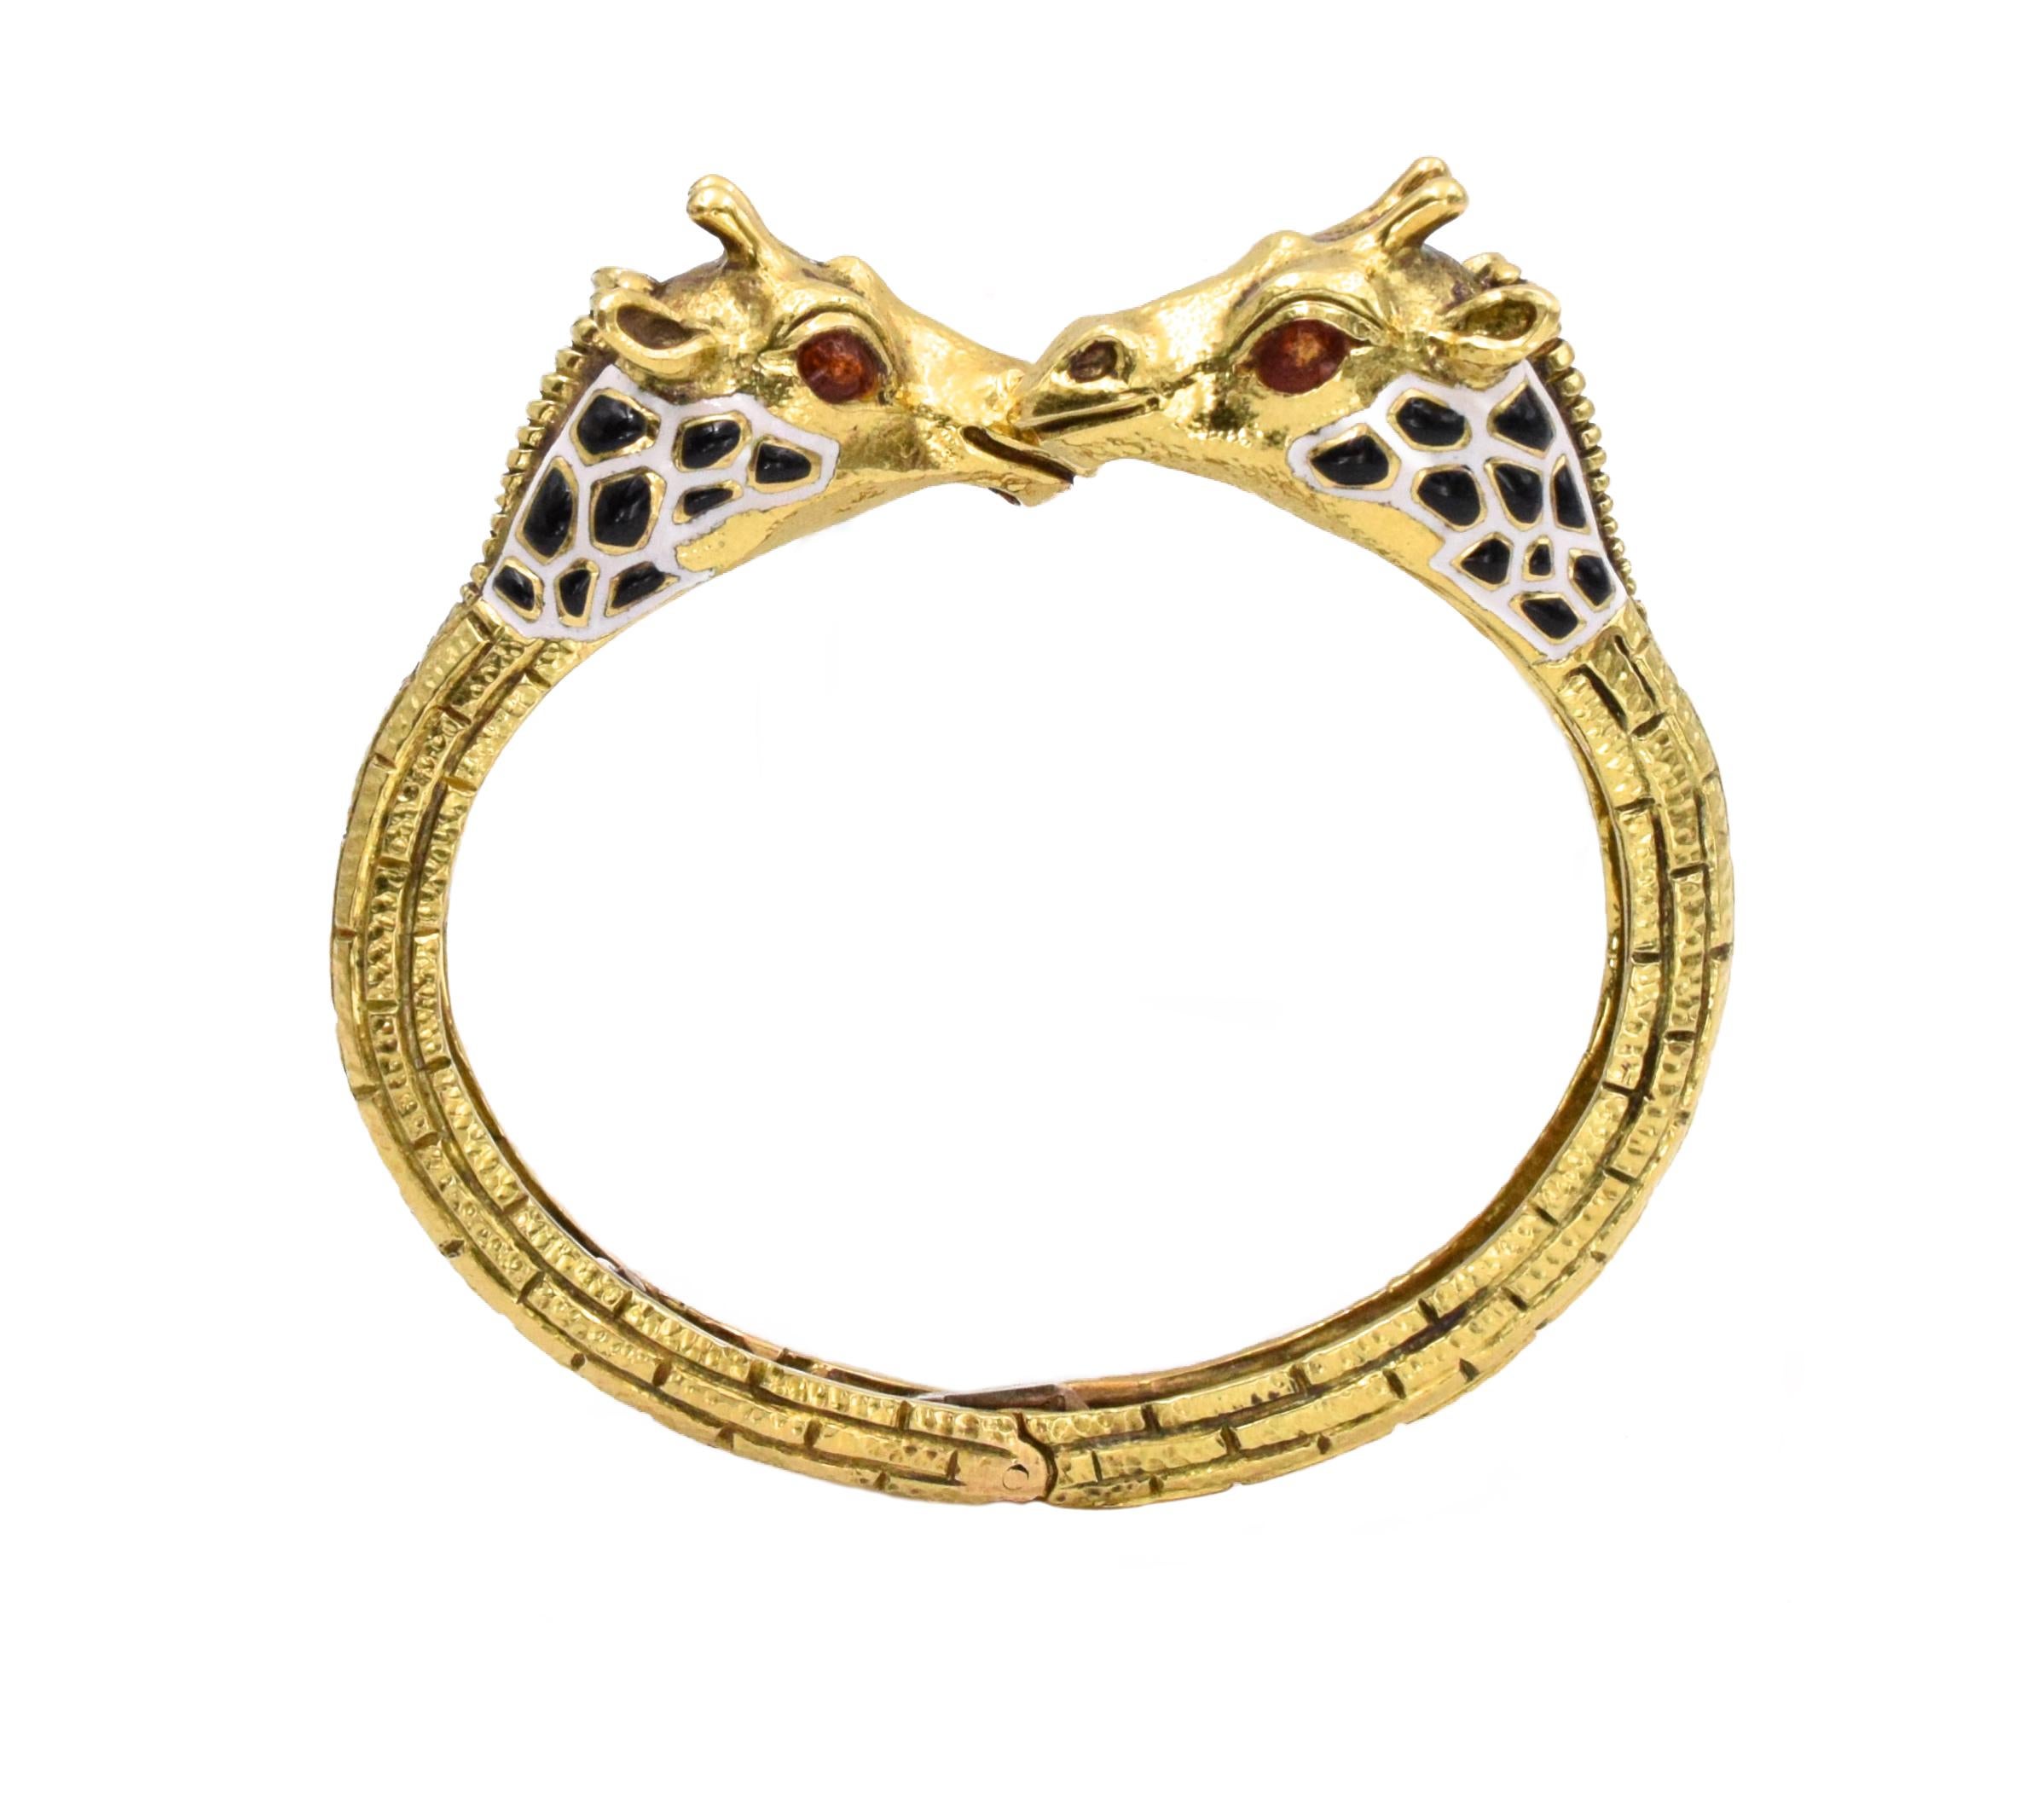 David Webb Giraffe Gold and Enamel Bangle The bangle bracelet has 2 giraffe heads made out of black, white, and red enamel and 18 k yellow gold.
Signed: David Webb
Wrist size is 6. Weighs 61.3 grams